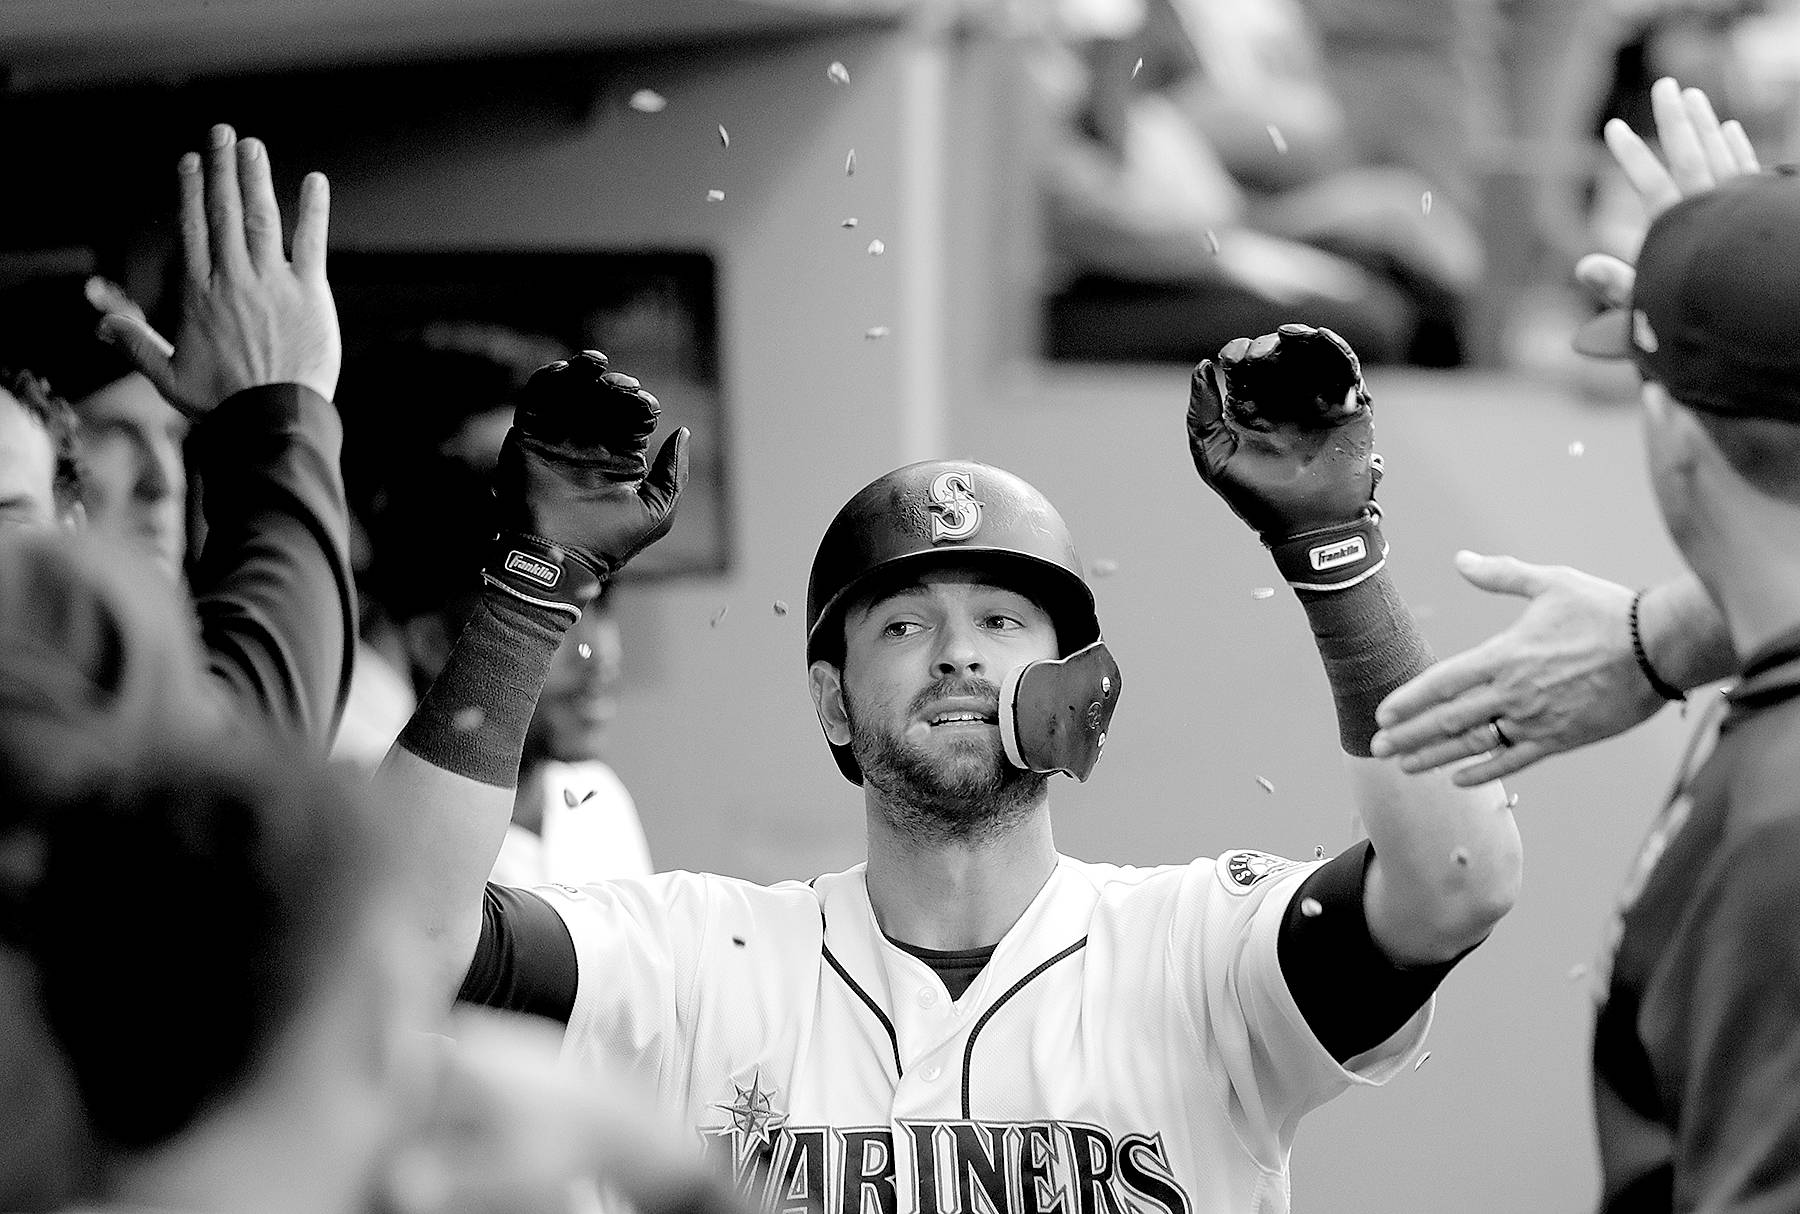 FILE - Seattle Mariners' Mitch Haniger is congratulated and showered with sunflower seeds after his solo home run against the Houston Astros in the third inning of a baseball game in Seattle, in this Tuesday, June 4, 2019, file photo. Mitch Haniger never saw the field in 2020 for the Seattle Mariners. He barely saw the field in 2019. He's nearly three years removed from being an All-Star, but the Mariners believe that with Haniger now full healthy he can once again be that caliber of player. (AP Photo/Elaine Thompson, File)